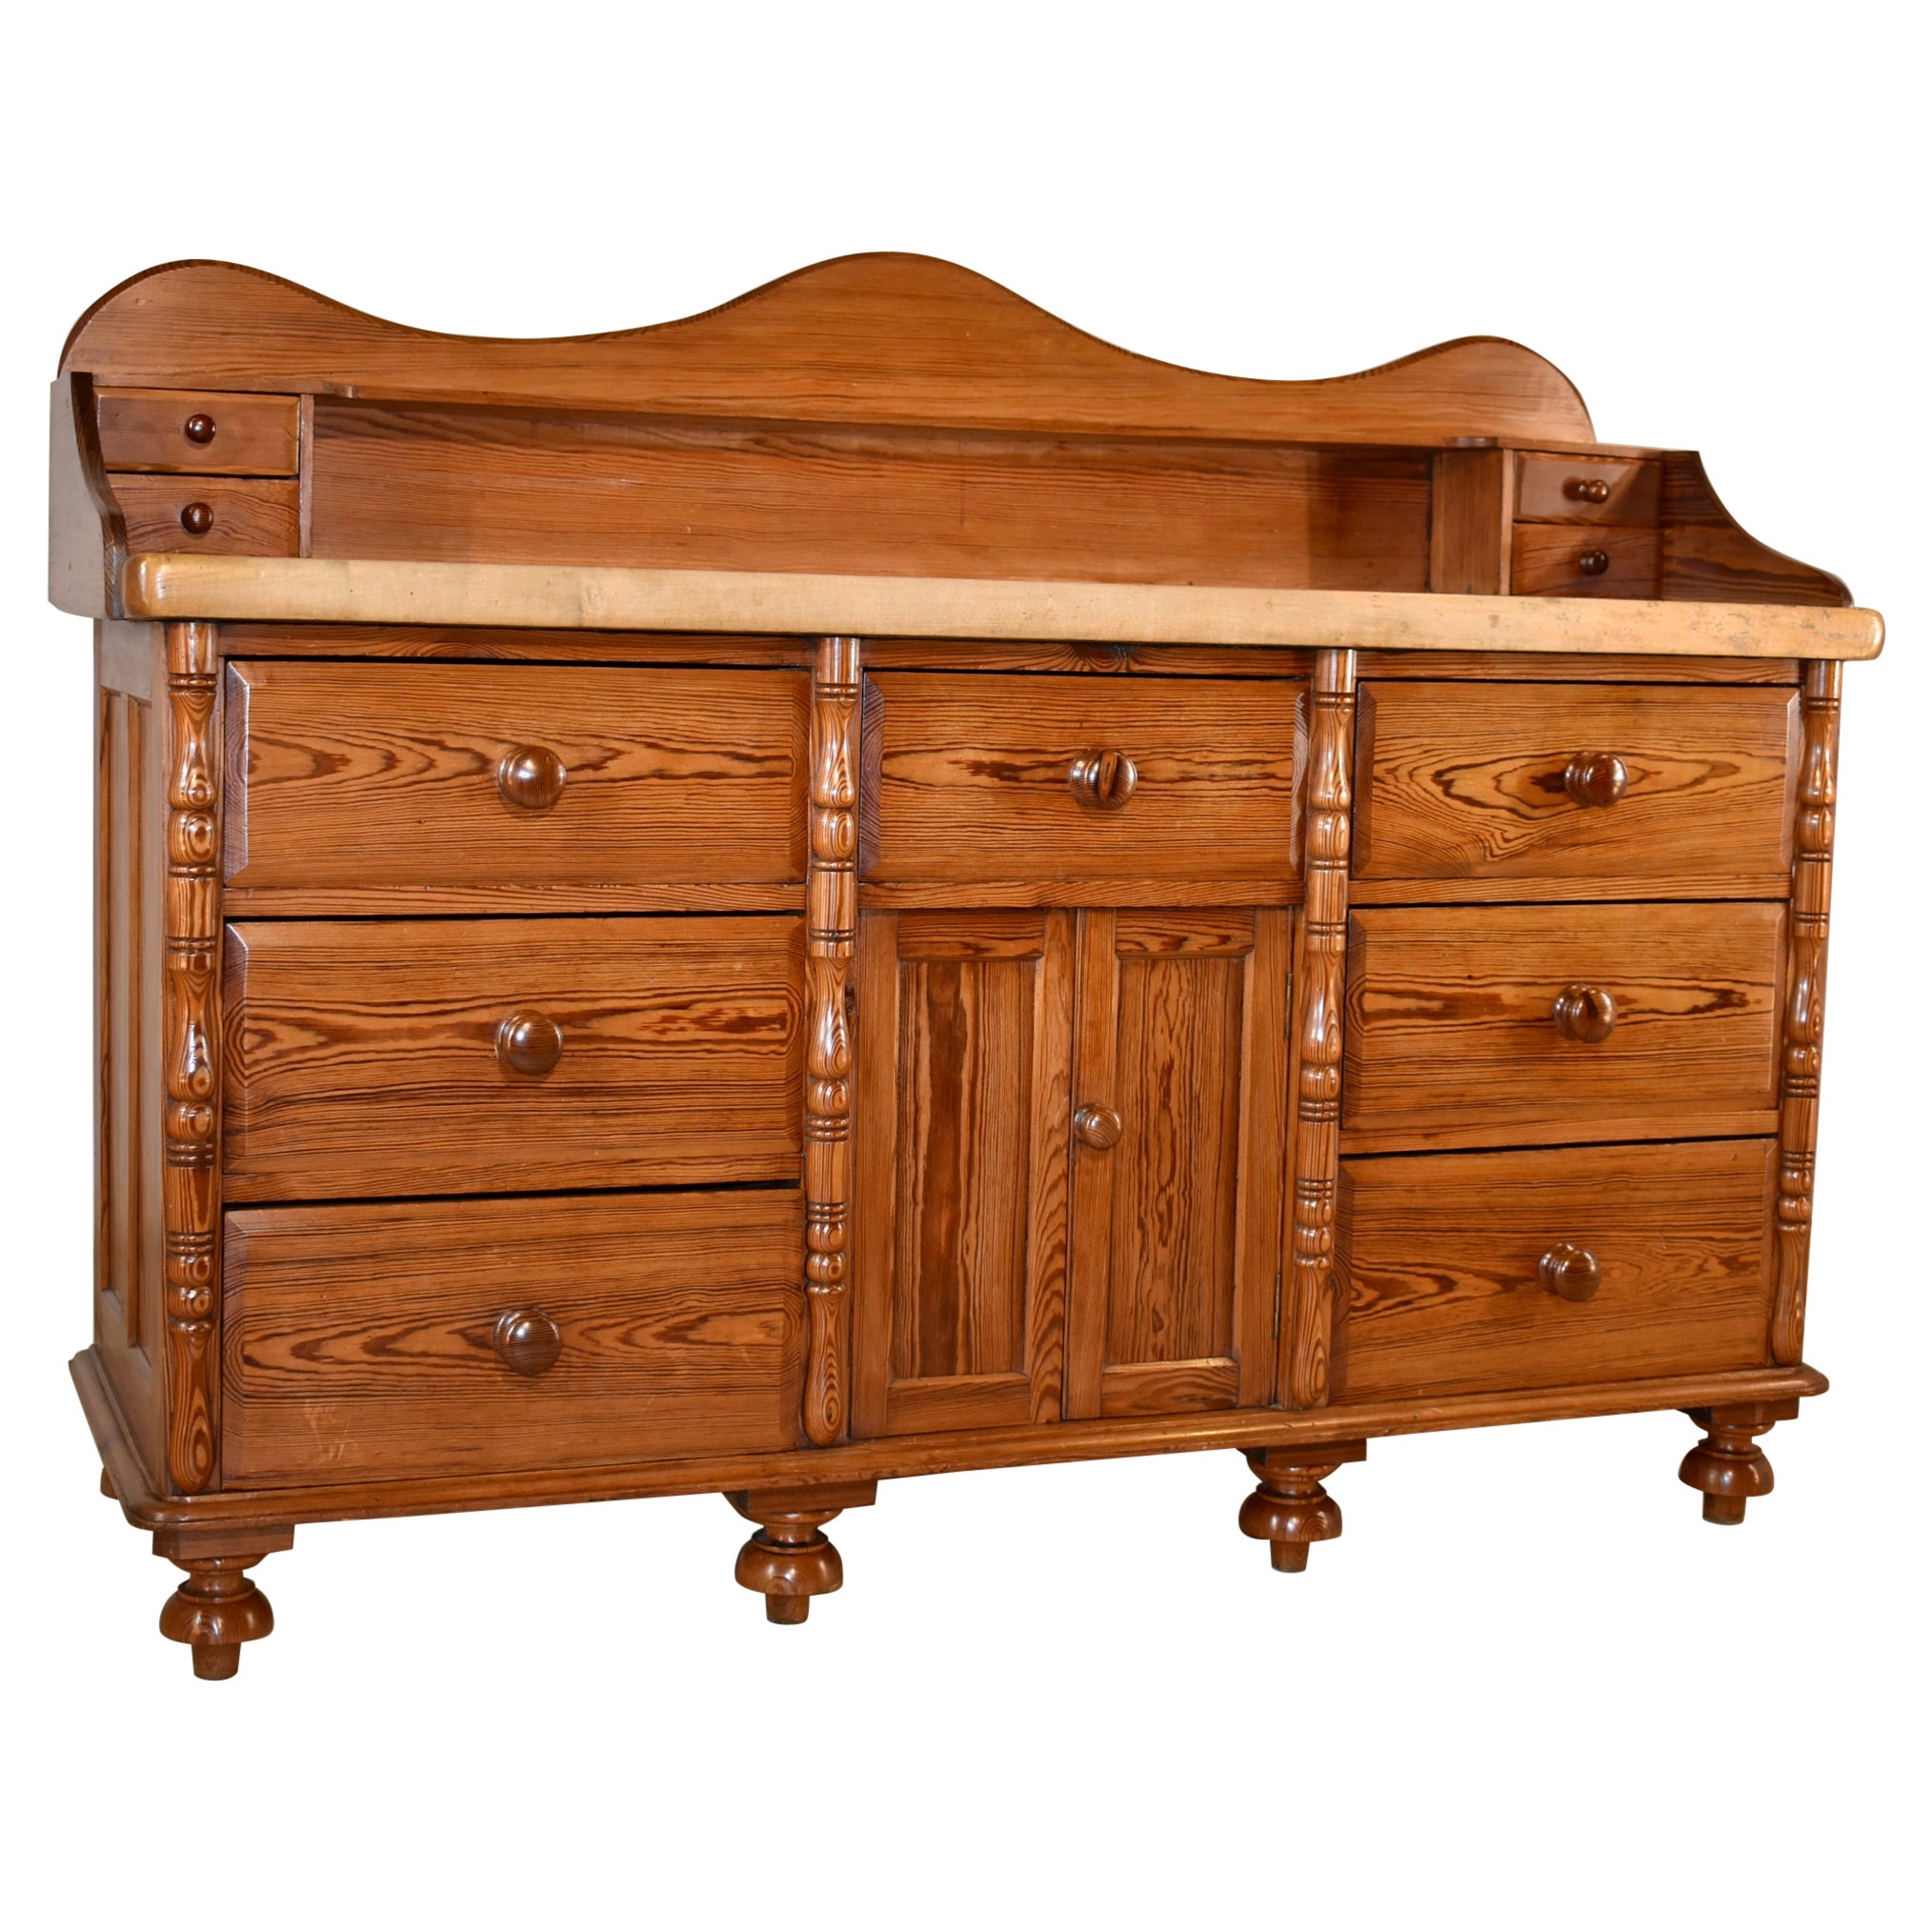 19th Century Pitch Pine Sideboard with Sycamore Top For Sale